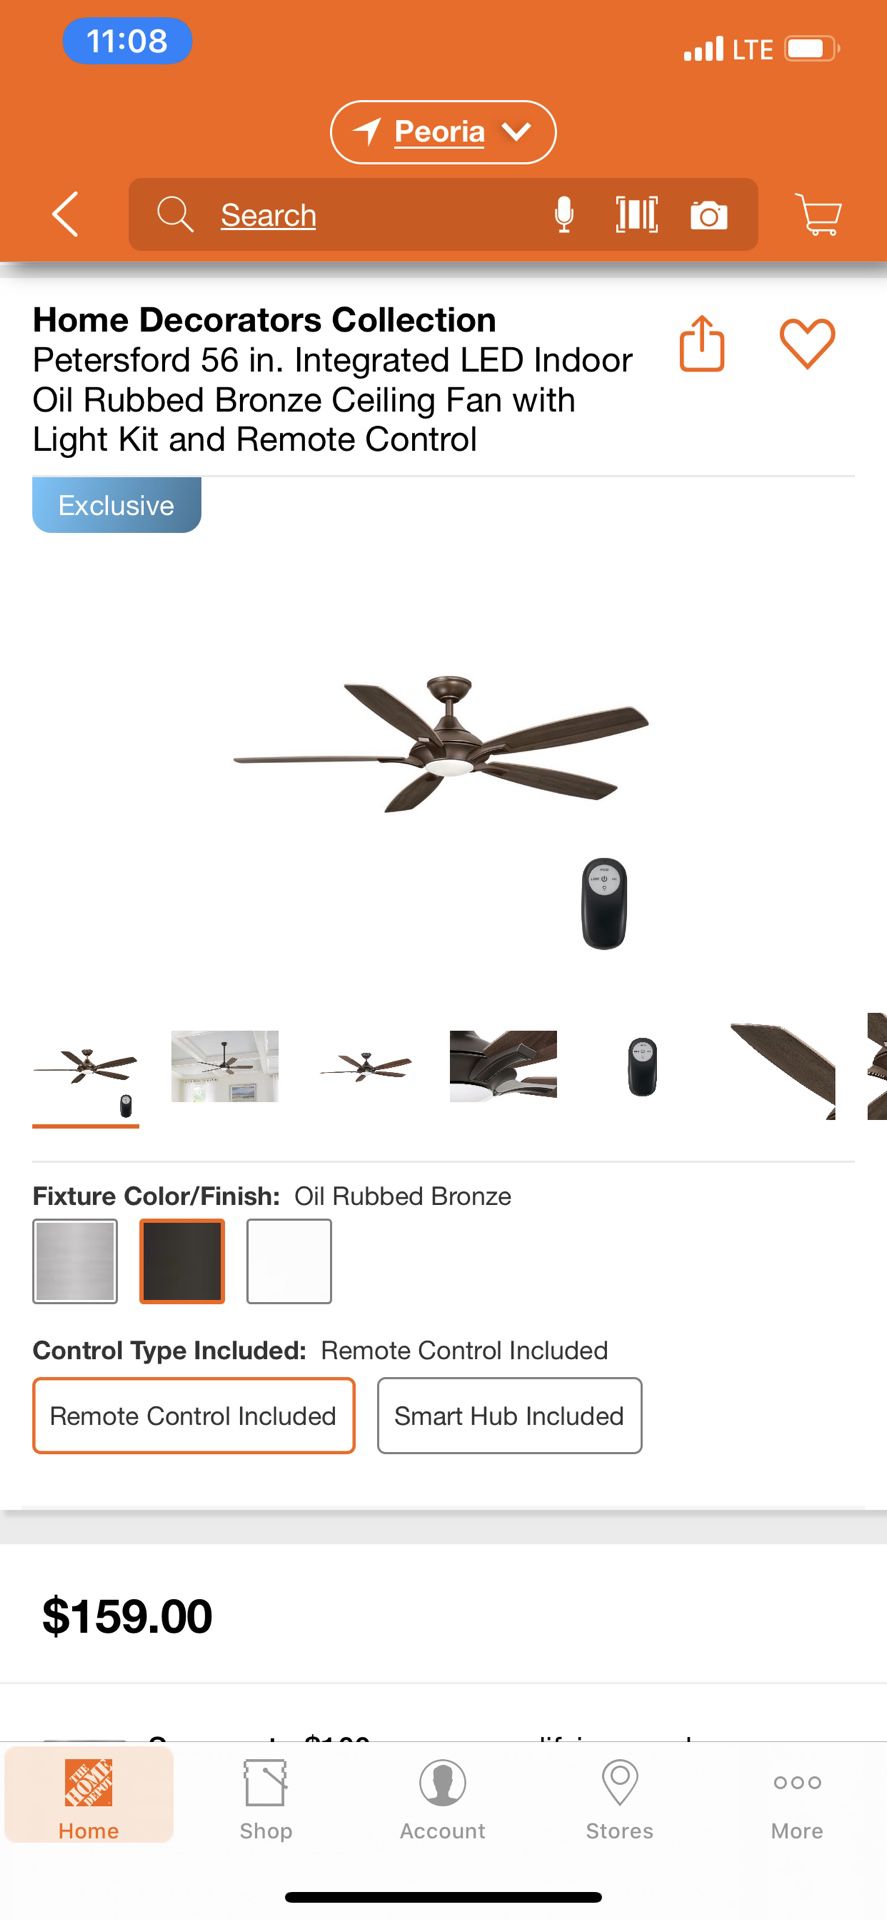 Petersford 56 inch oil rubbed bronze ceiling fan with remote